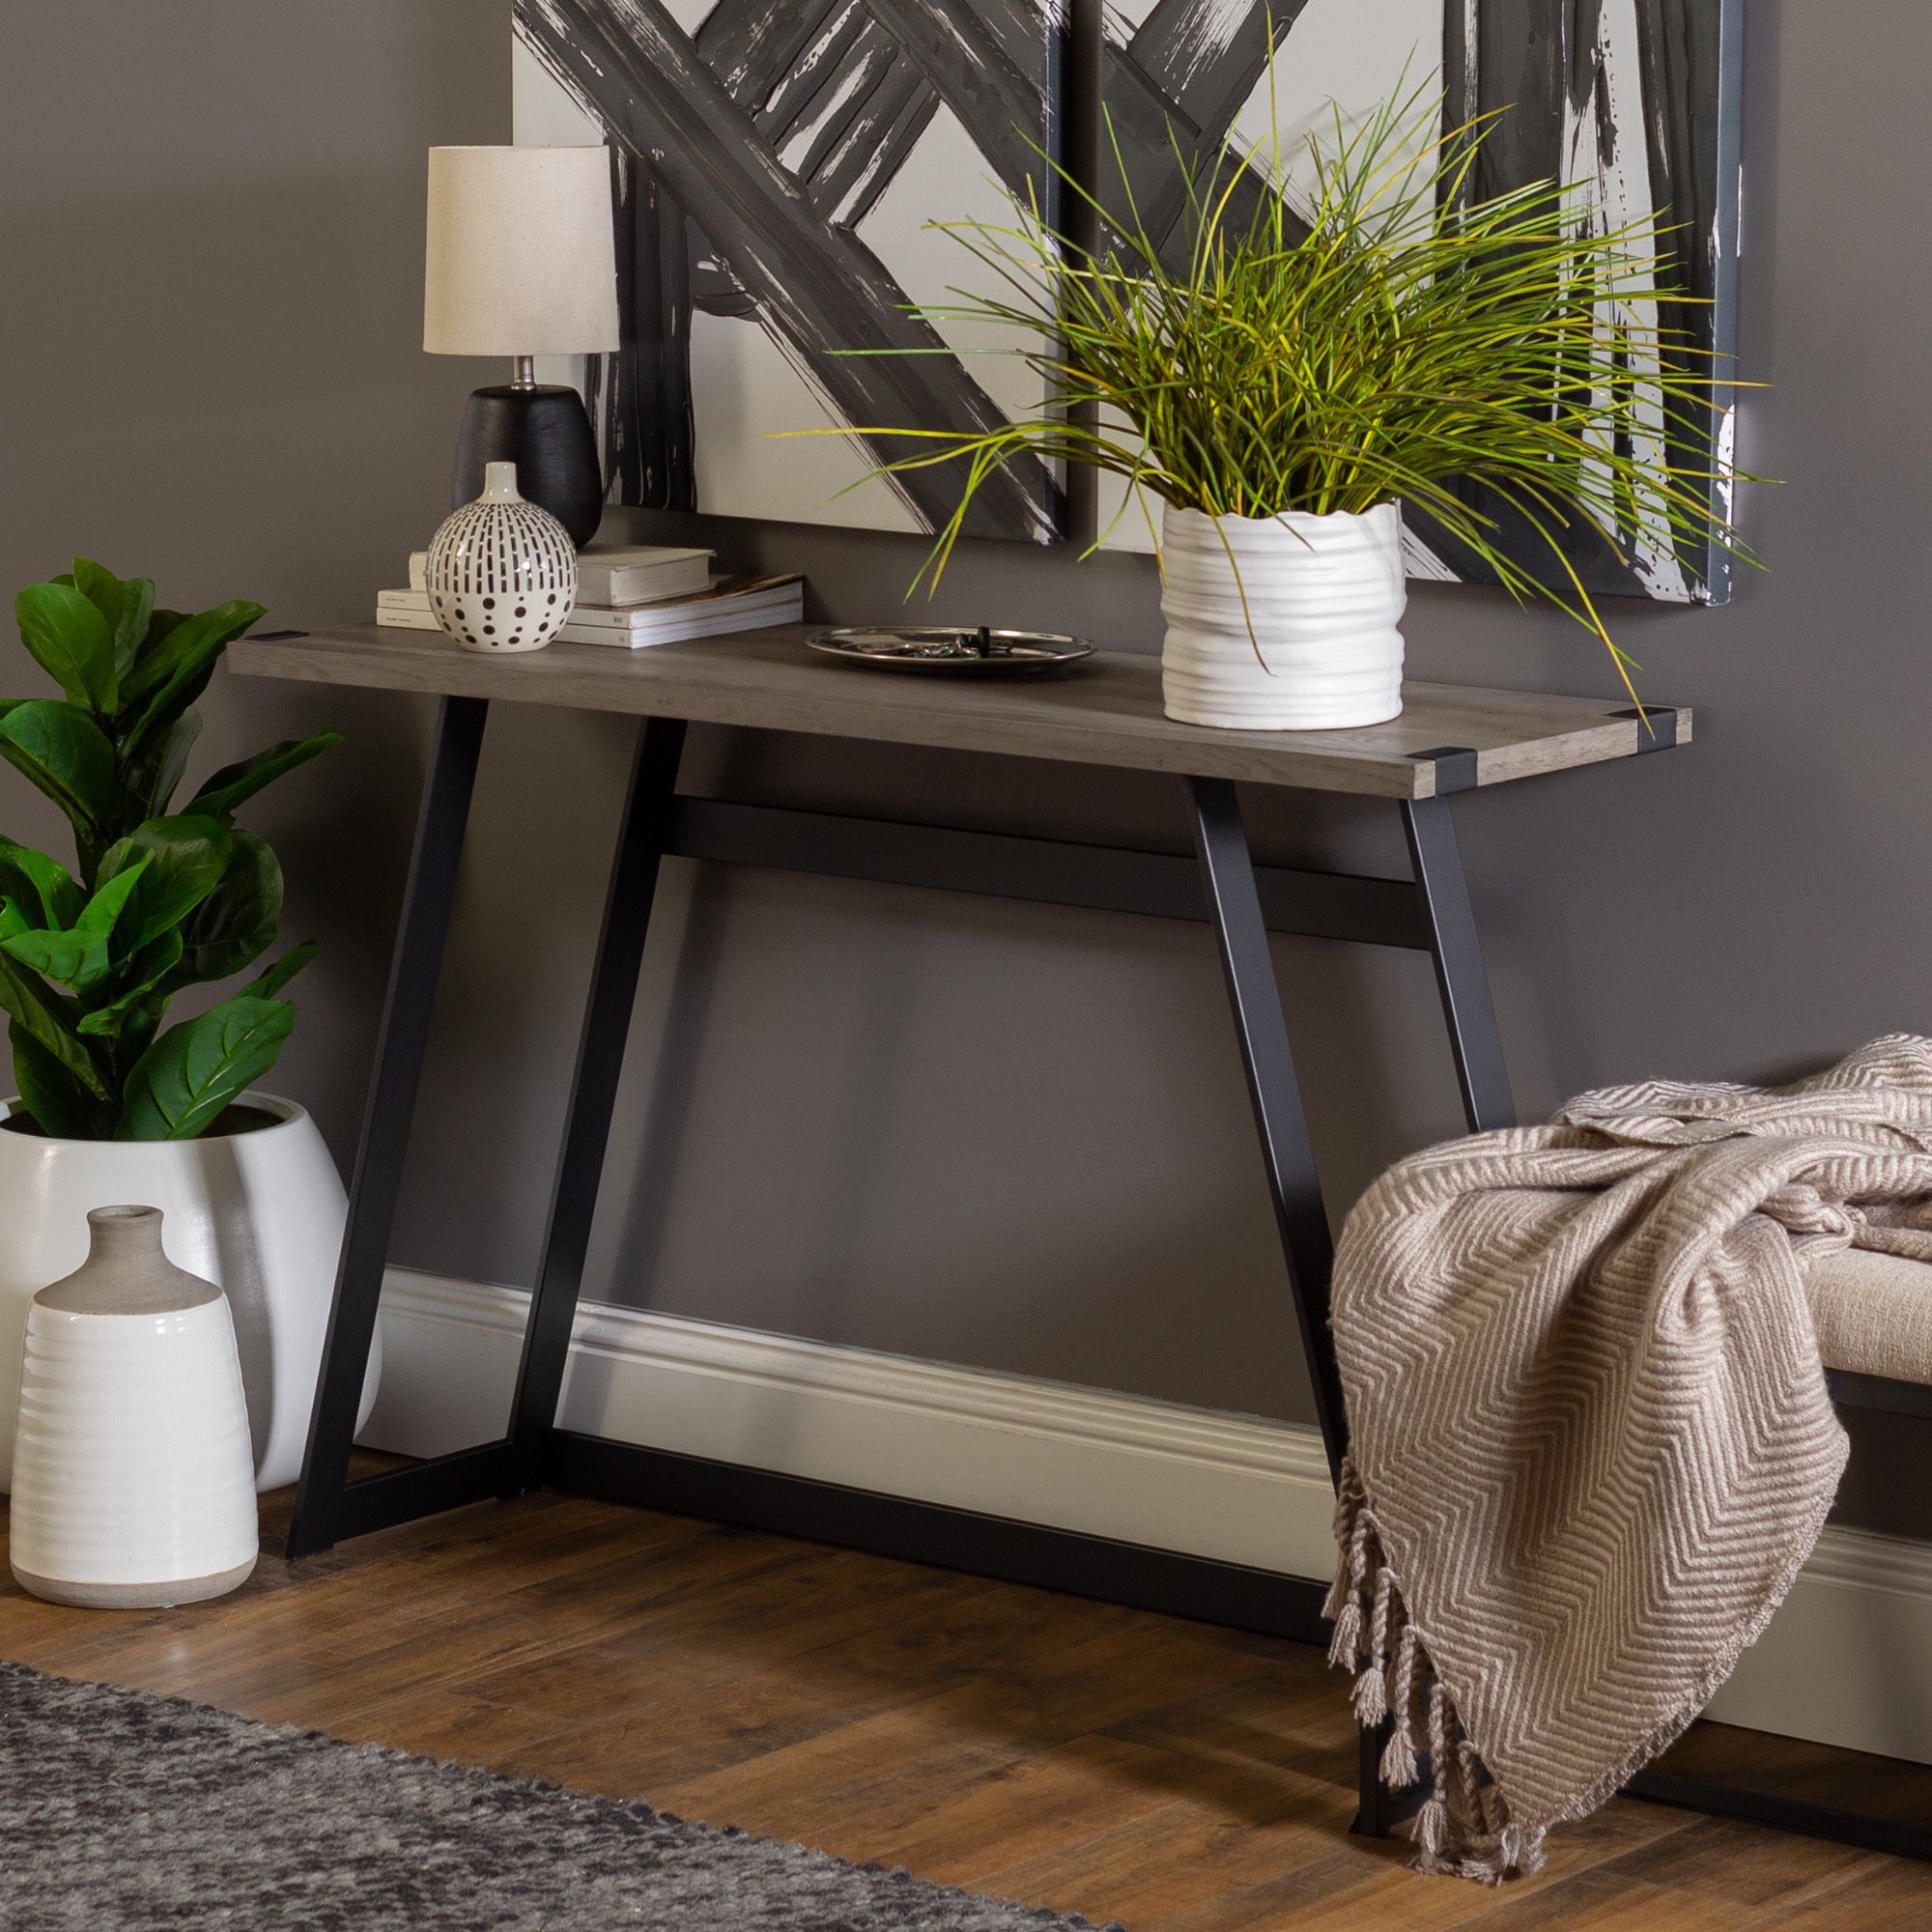 Manor Park Rustic Wood And Metal Entryway Table, Grey Wash – Walmart Inside Gray Driftwood And Metal Console Tables (View 12 of 20)